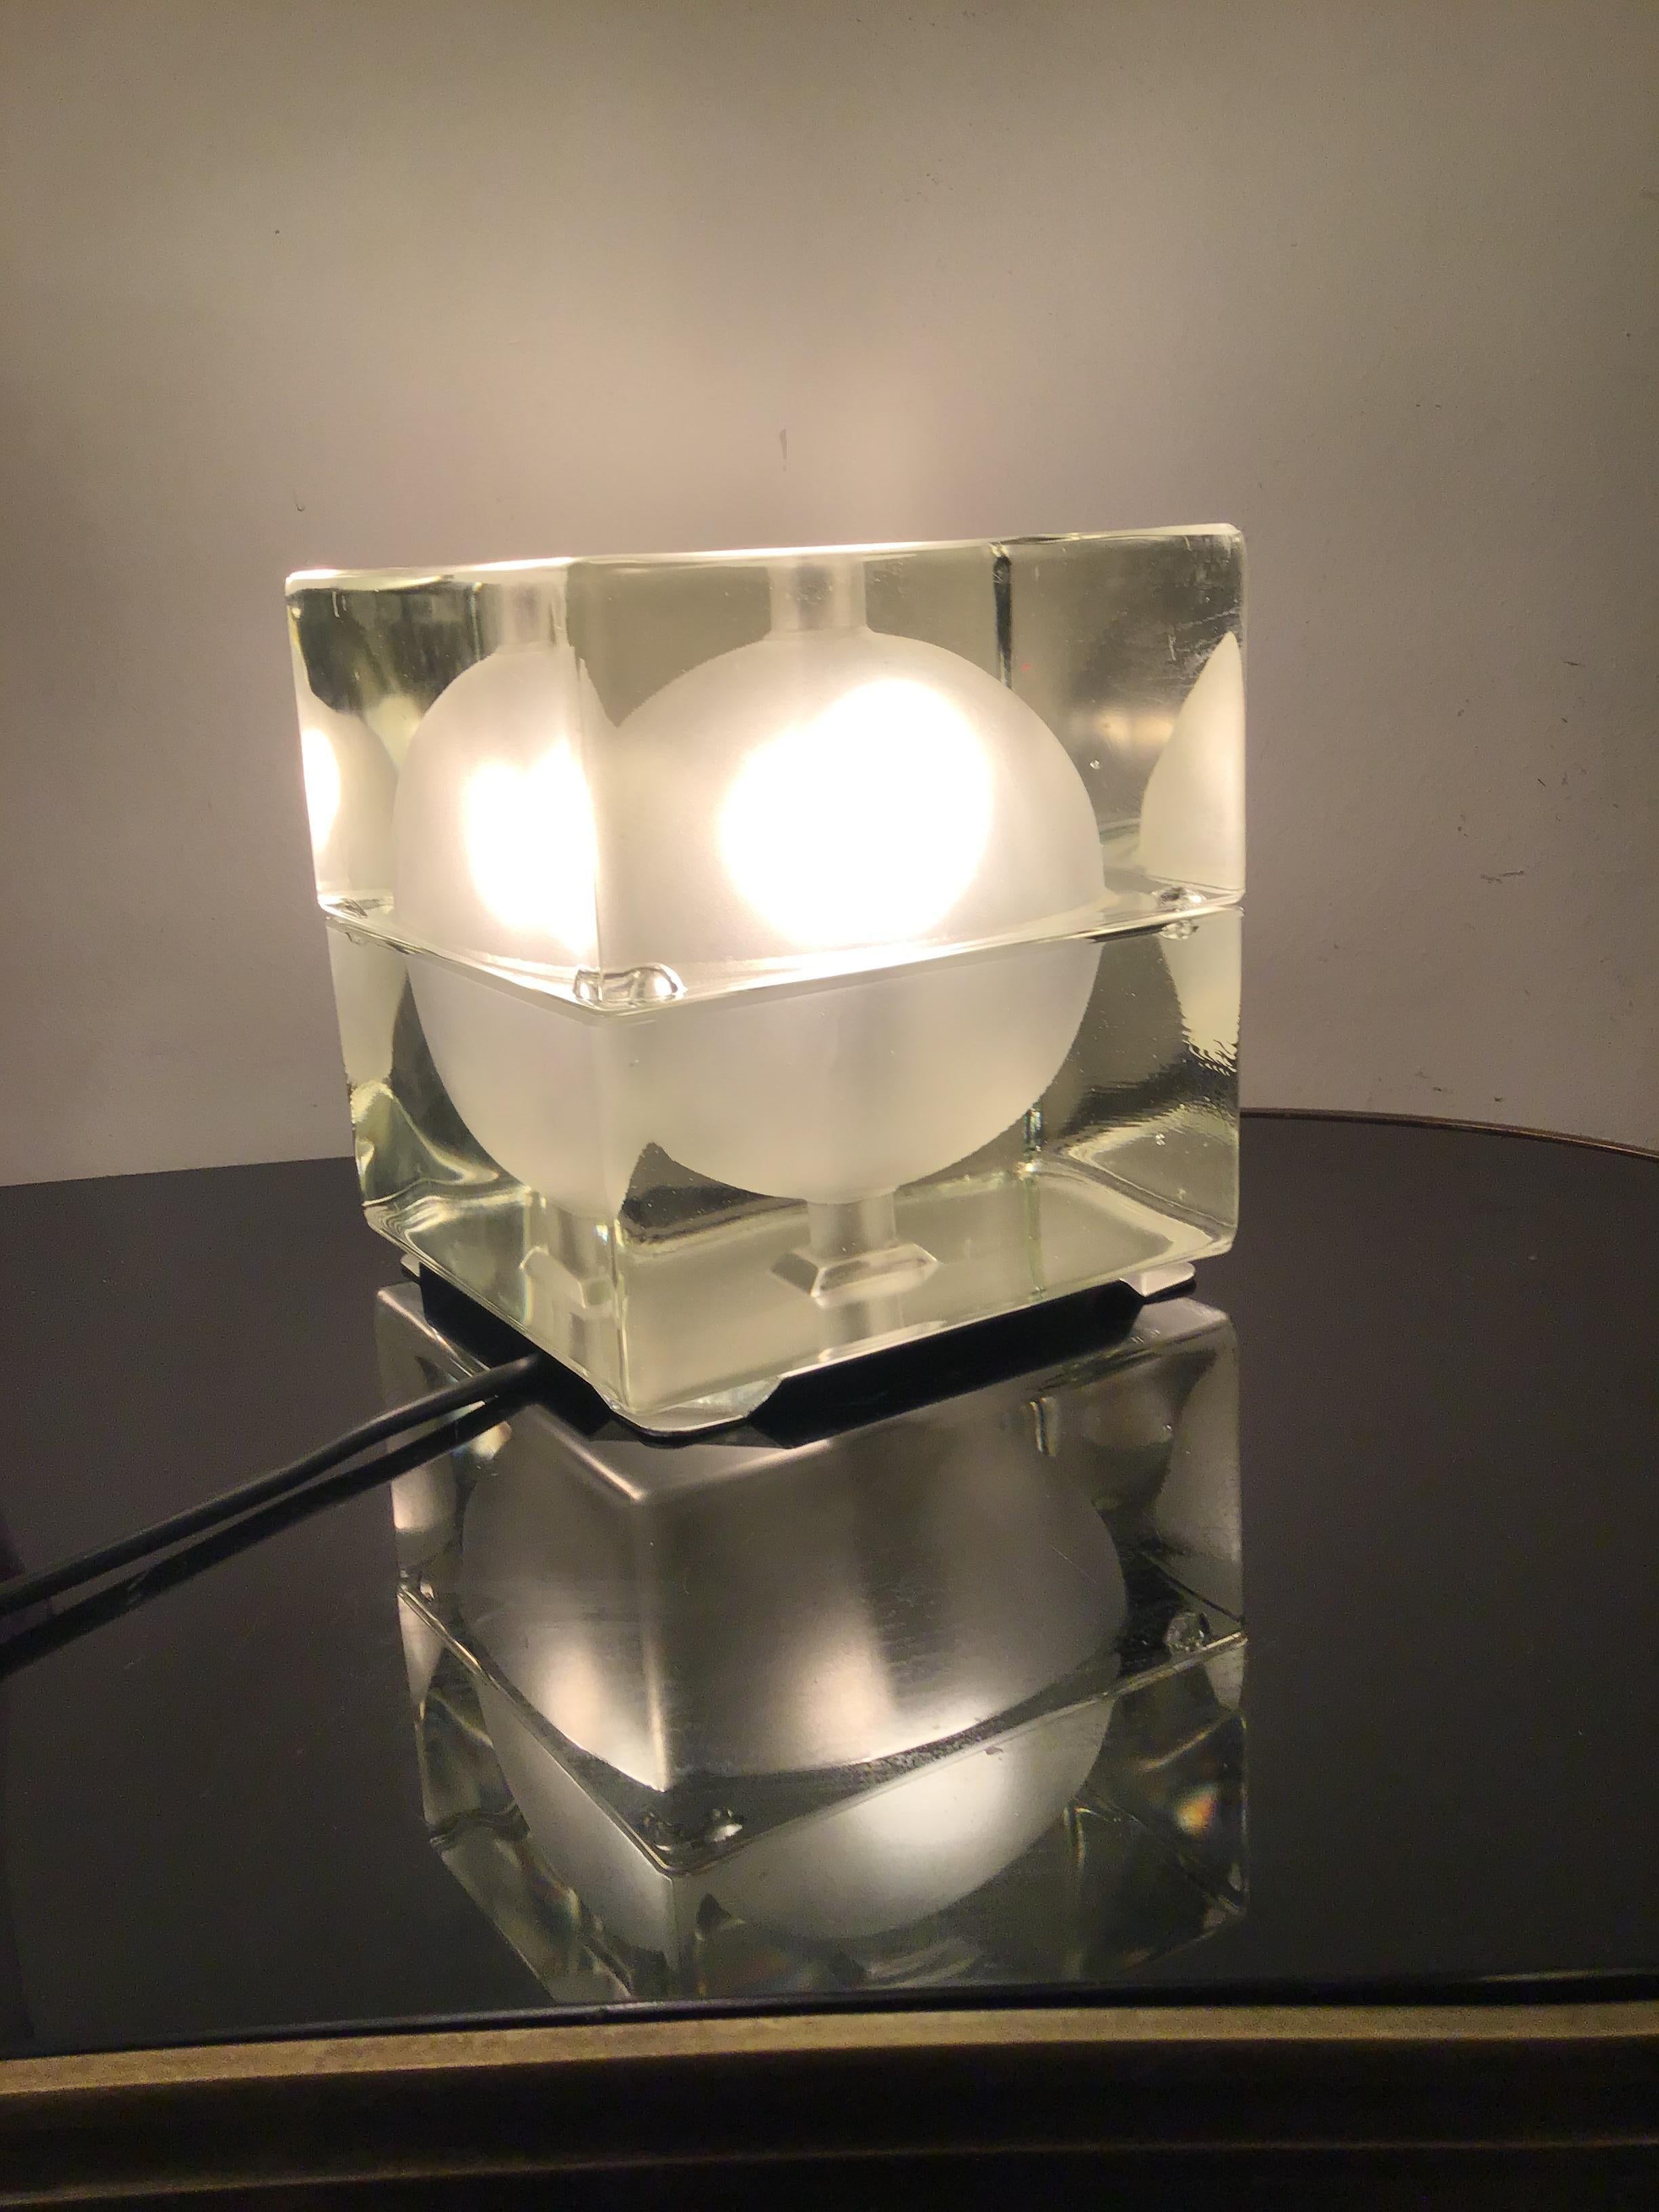 Mid-20th Century Alessandro Mendini “Cubosfera” Table Lamp Metal Crome Glass 1968 Italy For Sale